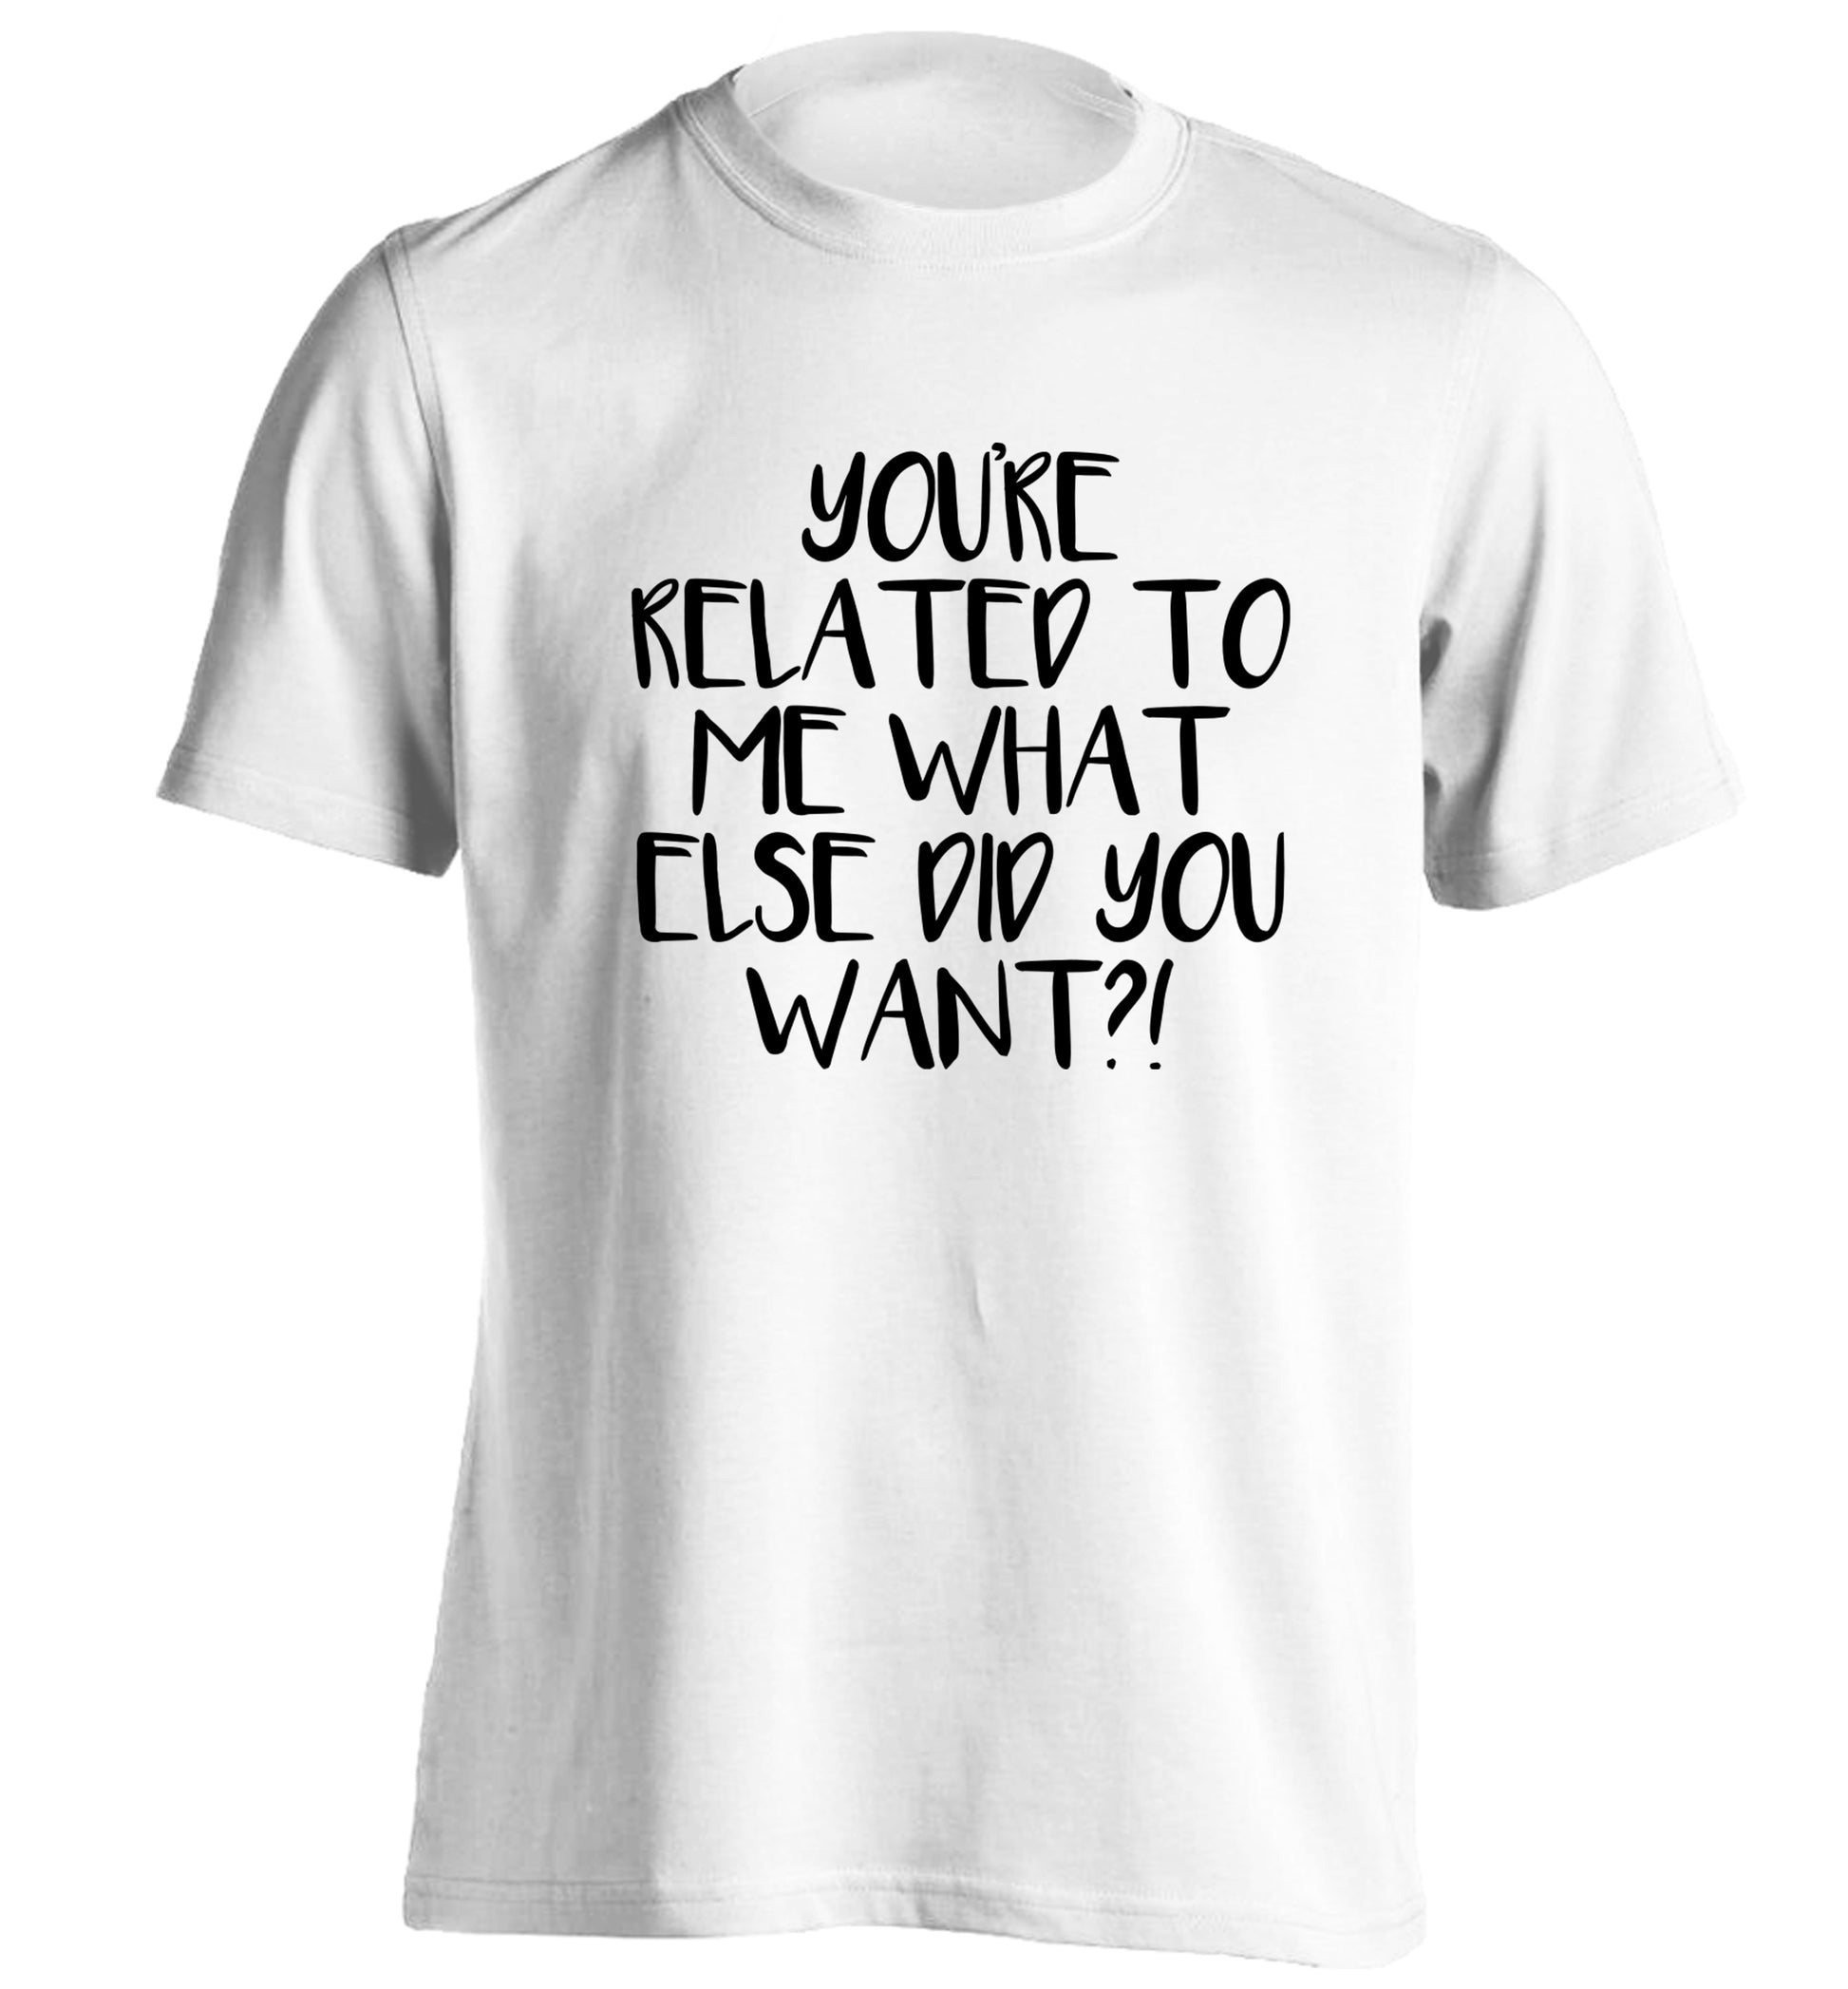 You're related to me what more do you want? adults unisex white Tshirt 2XL